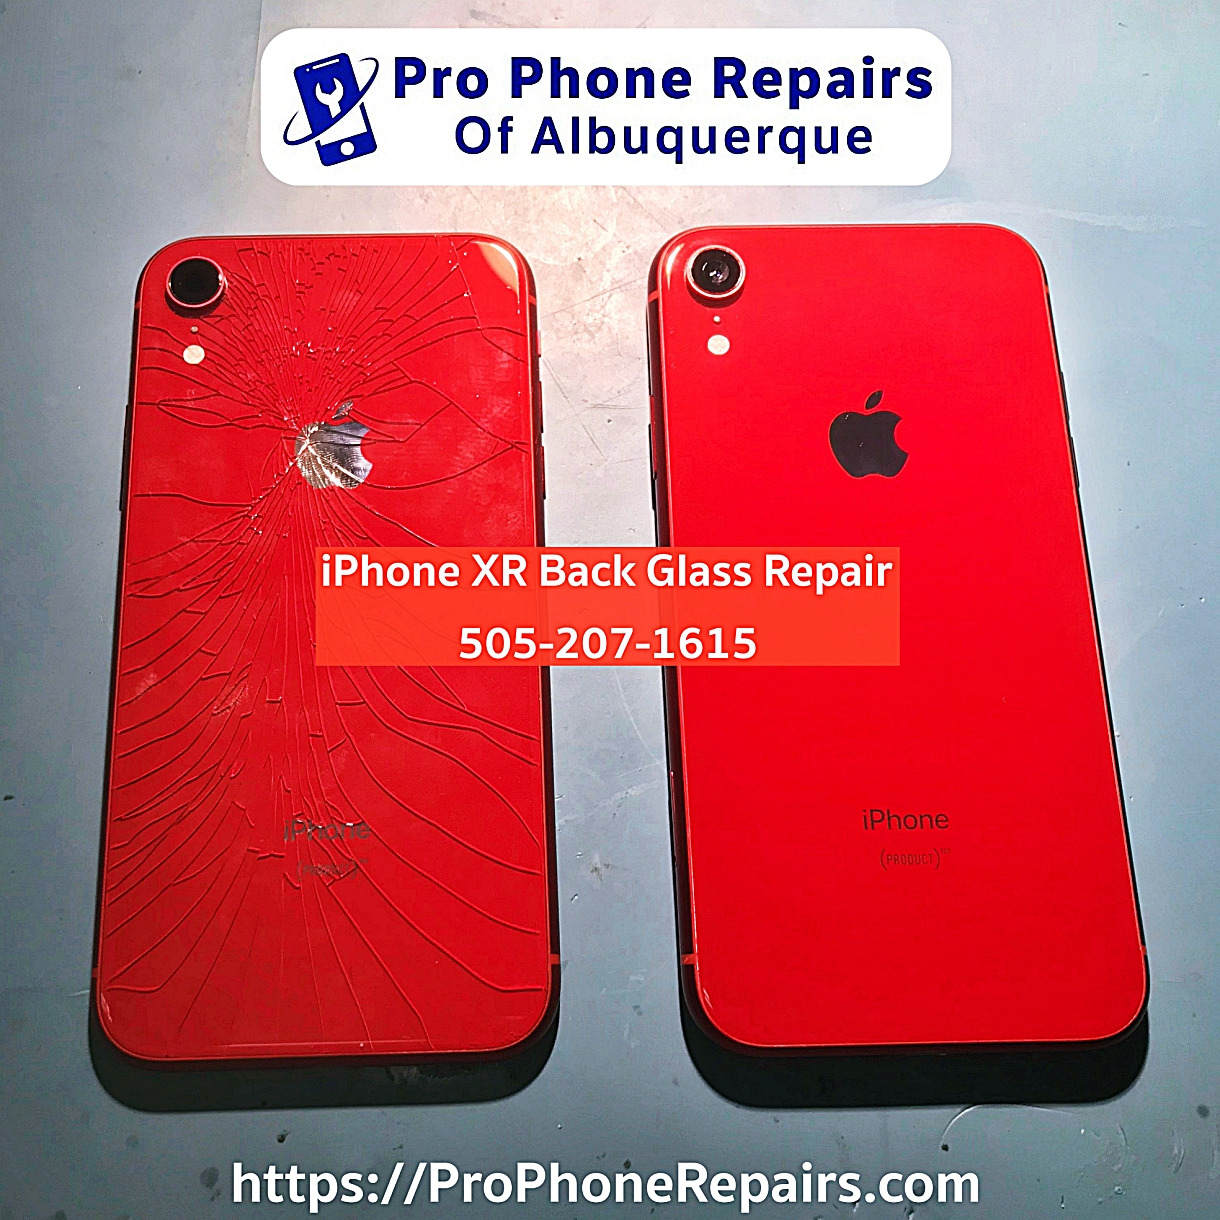 iPhone XR back glass repair by Pro Phone Repairs of Albuquerque